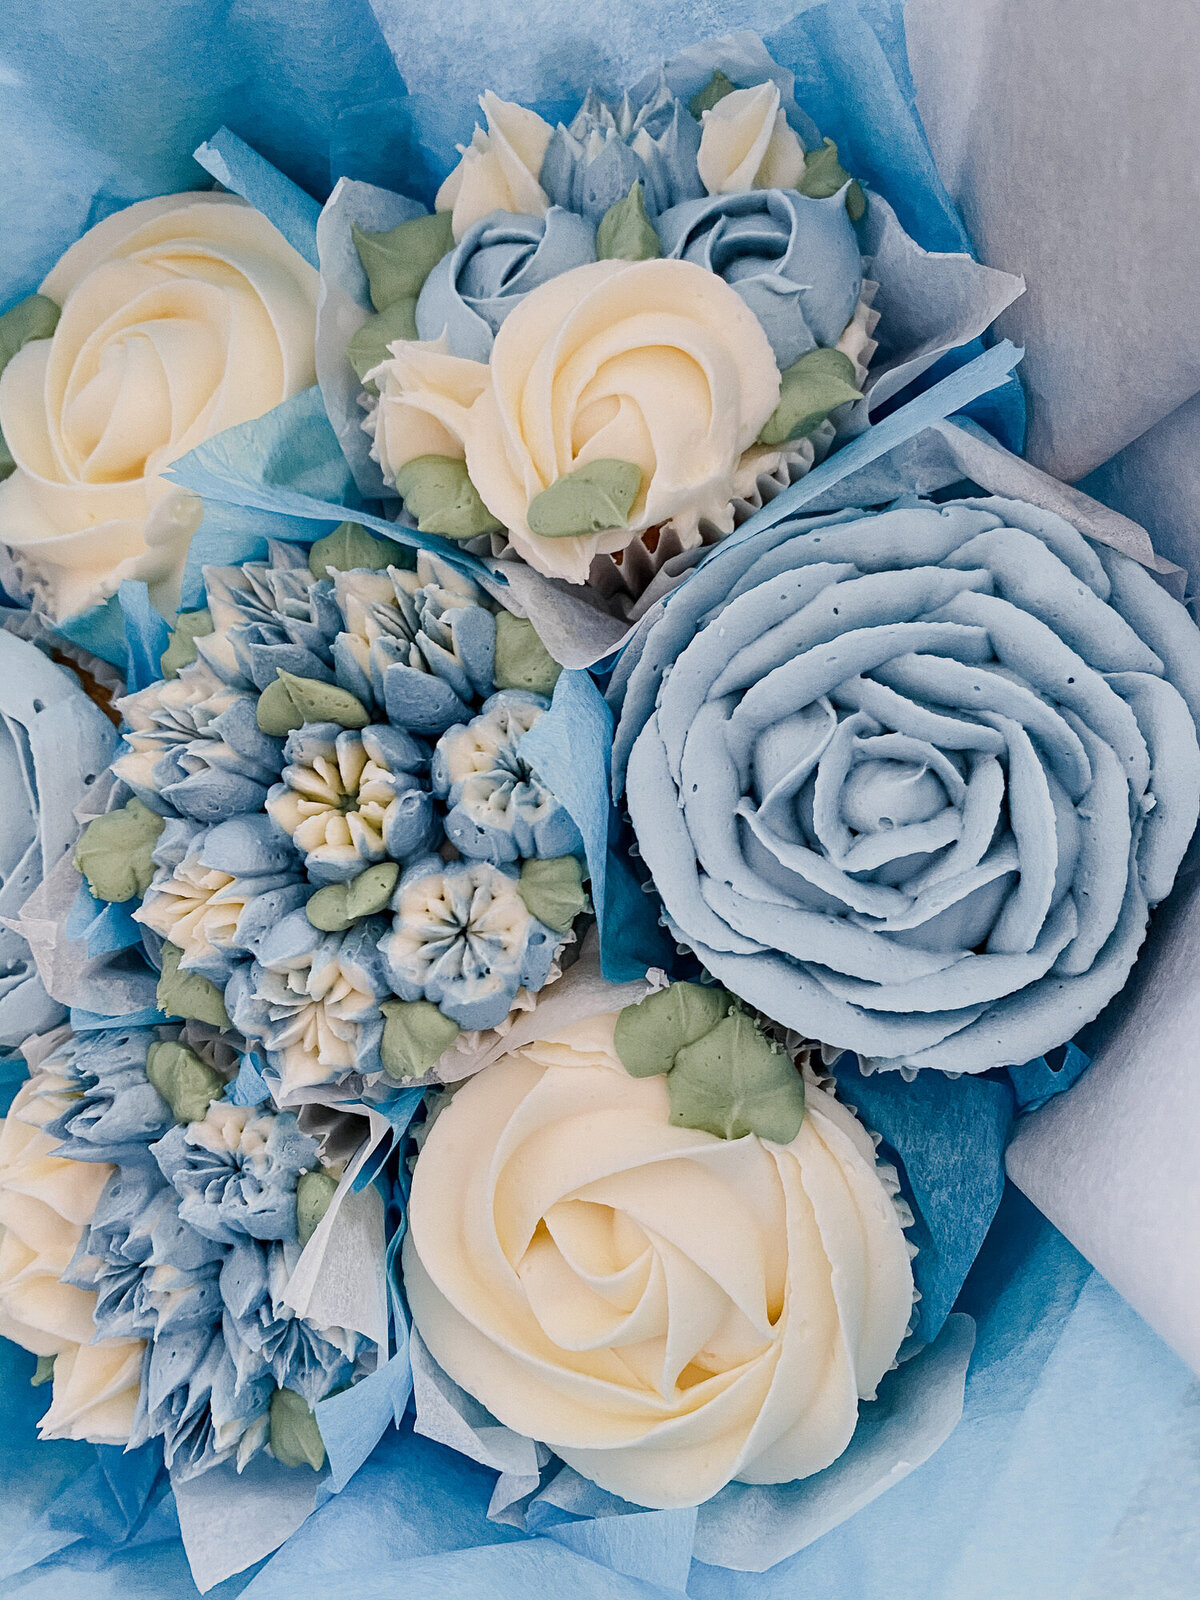 Layers-and-Graces-London-essex-floral-Cake-Designer-6